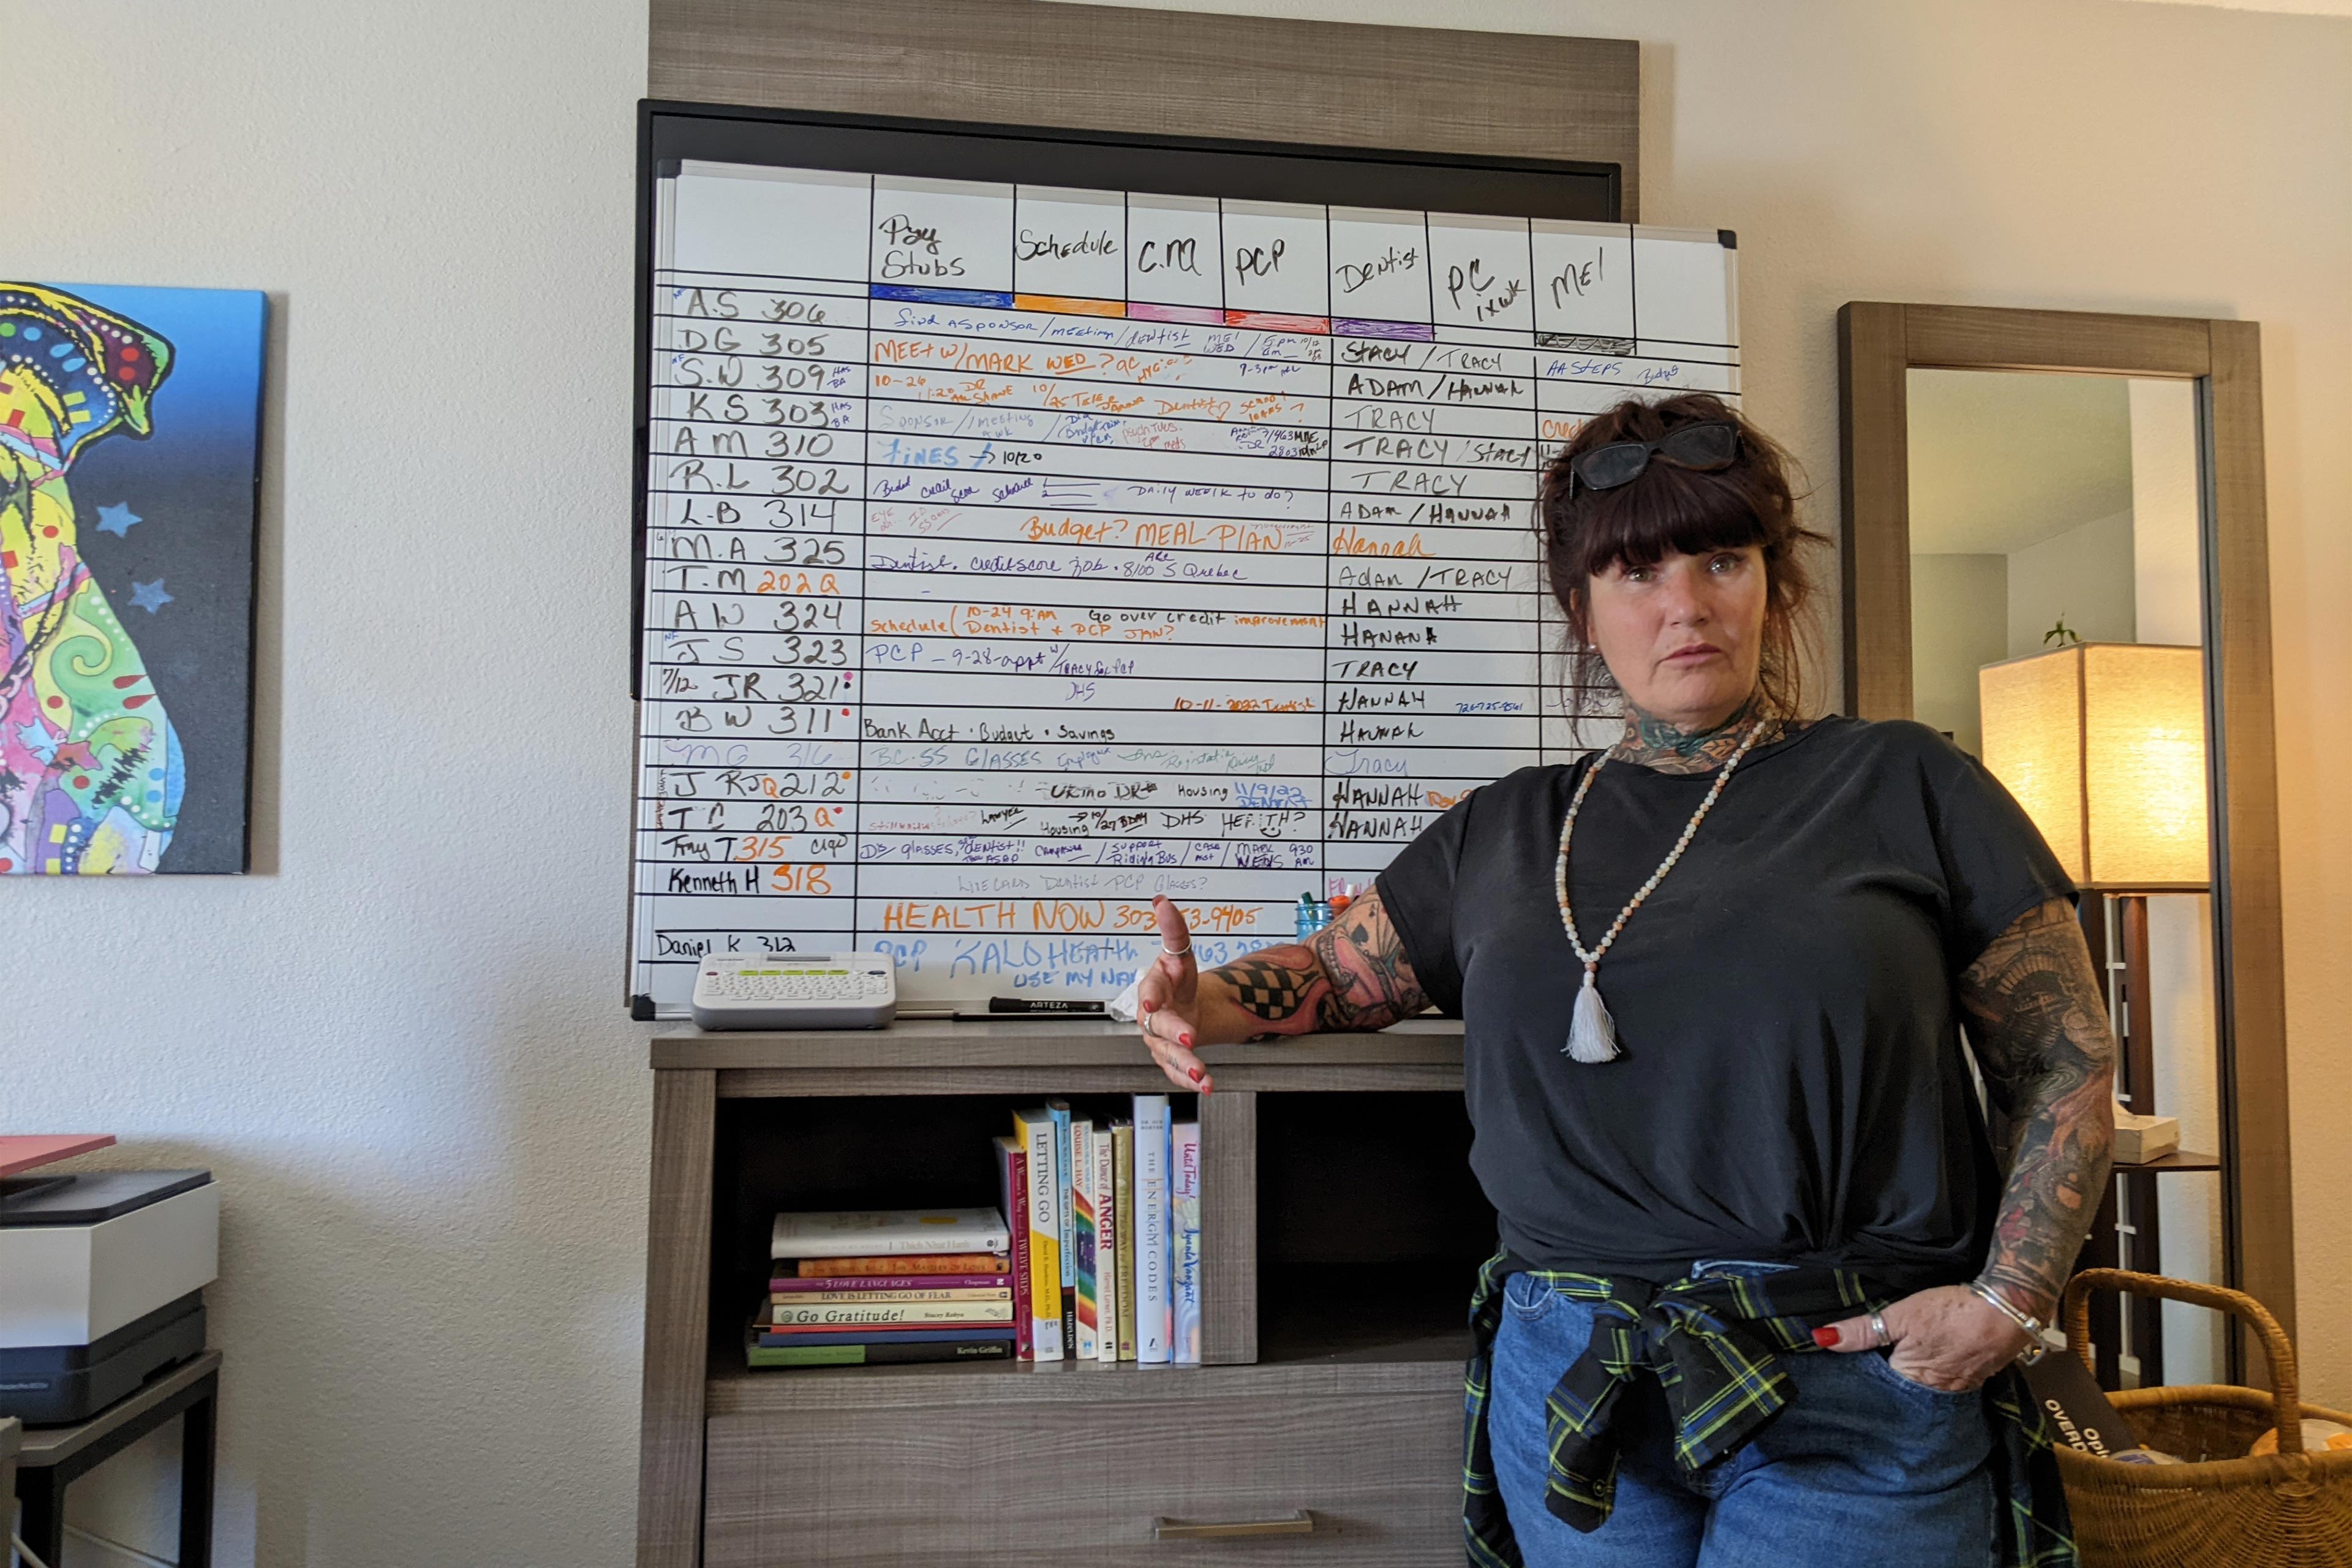 A photo shows Donna Norton standing in front of a whiteboard listing the schedules of her clients.